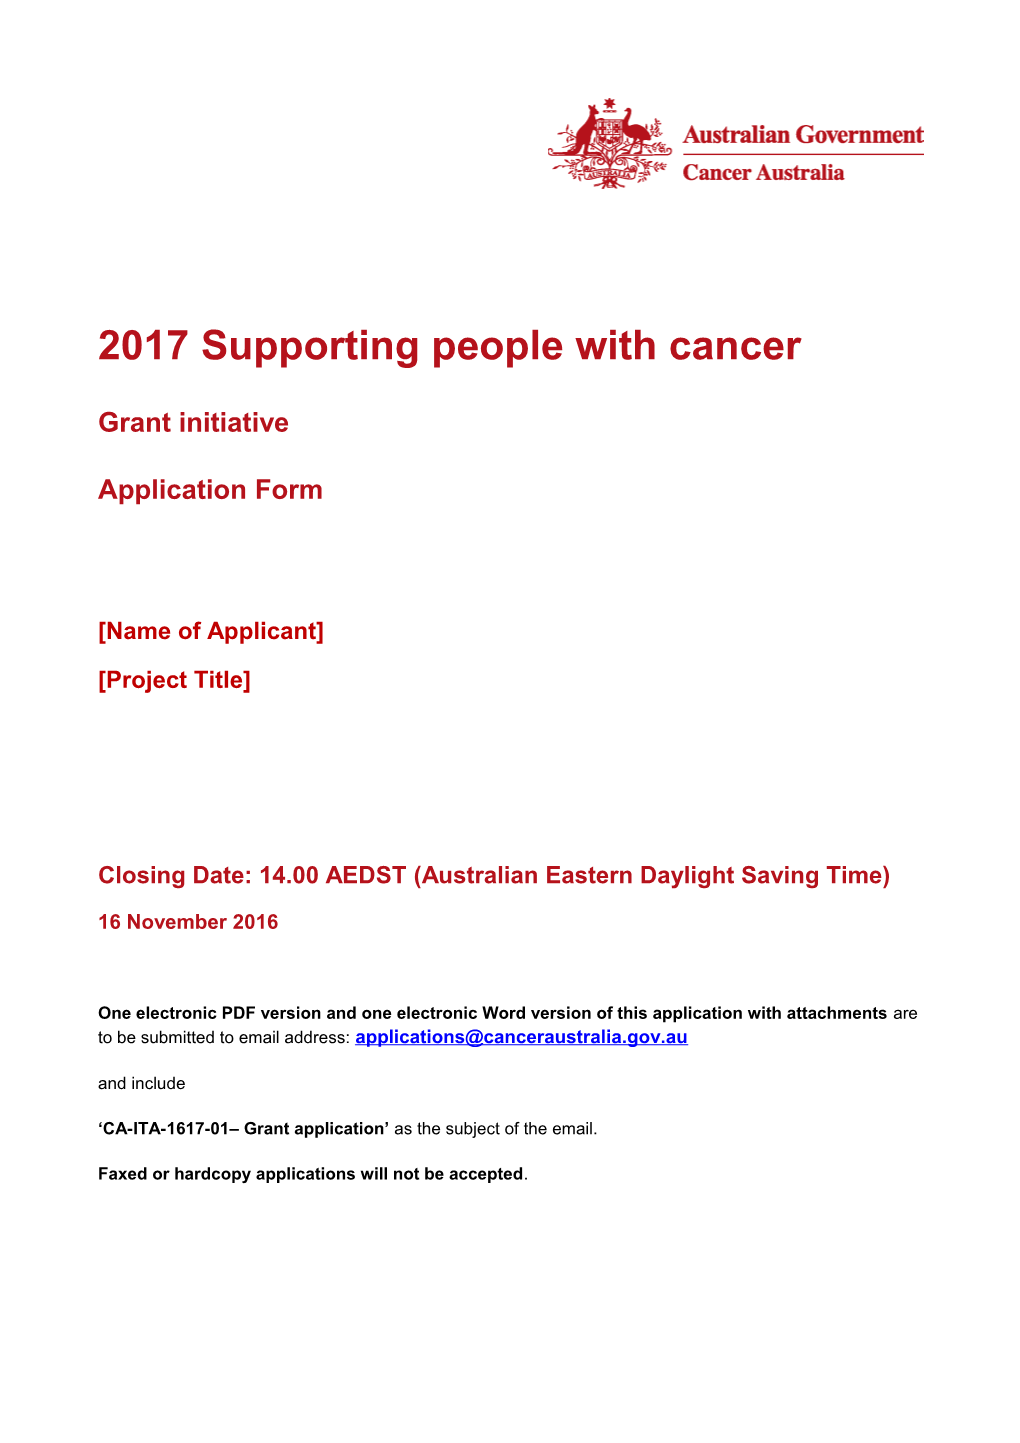 2017Supporting People with Cancer